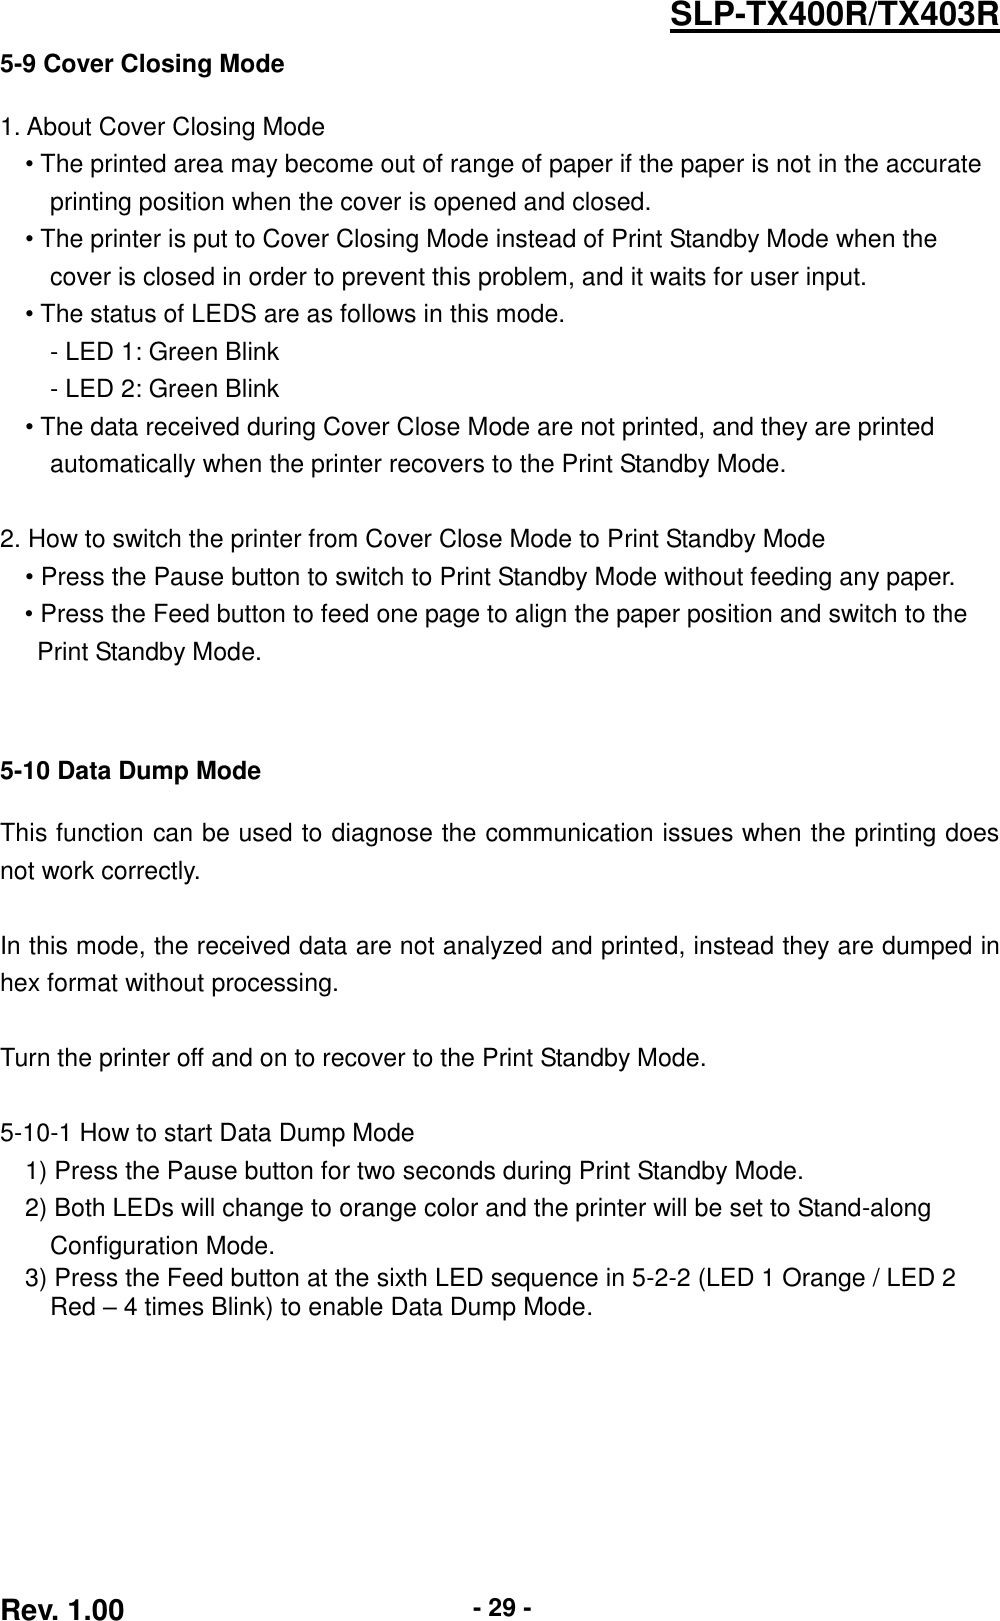  Rev. 1.00 - 29 - SLP-TX400R/TX403R 5-9 Cover Closing Mode  1. About Cover Closing Mode • The printed area may become out of range of paper if the paper is not in the accurate   printing position when the cover is opened and closed.   • The printer is put to Cover Closing Mode instead of Print Standby Mode when the   cover is closed in order to prevent this problem, and it waits for user input. • The status of LEDS are as follows in this mode. - LED 1: Green Blink   - LED 2: Green Blink • The data received during Cover Close Mode are not printed, and they are printed   automatically when the printer recovers to the Print Standby Mode.  2. How to switch the printer from Cover Close Mode to Print Standby Mode • Press the Pause button to switch to Print Standby Mode without feeding any paper. • Press the Feed button to feed one page to align the paper position and switch to the   Print Standby Mode.      5-10 Data Dump Mode  This function can be used to diagnose the communication issues when the printing does not work correctly.  In this mode, the received data are not analyzed and printed, instead they are dumped in hex format without processing.  Turn the printer off and on to recover to the Print Standby Mode.    5-10-1 How to start Data Dump Mode 1) Press the Pause button for two seconds during Print Standby Mode. 2) Both LEDs will change to orange color and the printer will be set to Stand-along   Configuration Mode. 3) Press the Feed button at the sixth LED sequence in 5-2-2 (LED 1 Orange / LED 2   Red – 4 times Blink) to enable Data Dump Mode. 